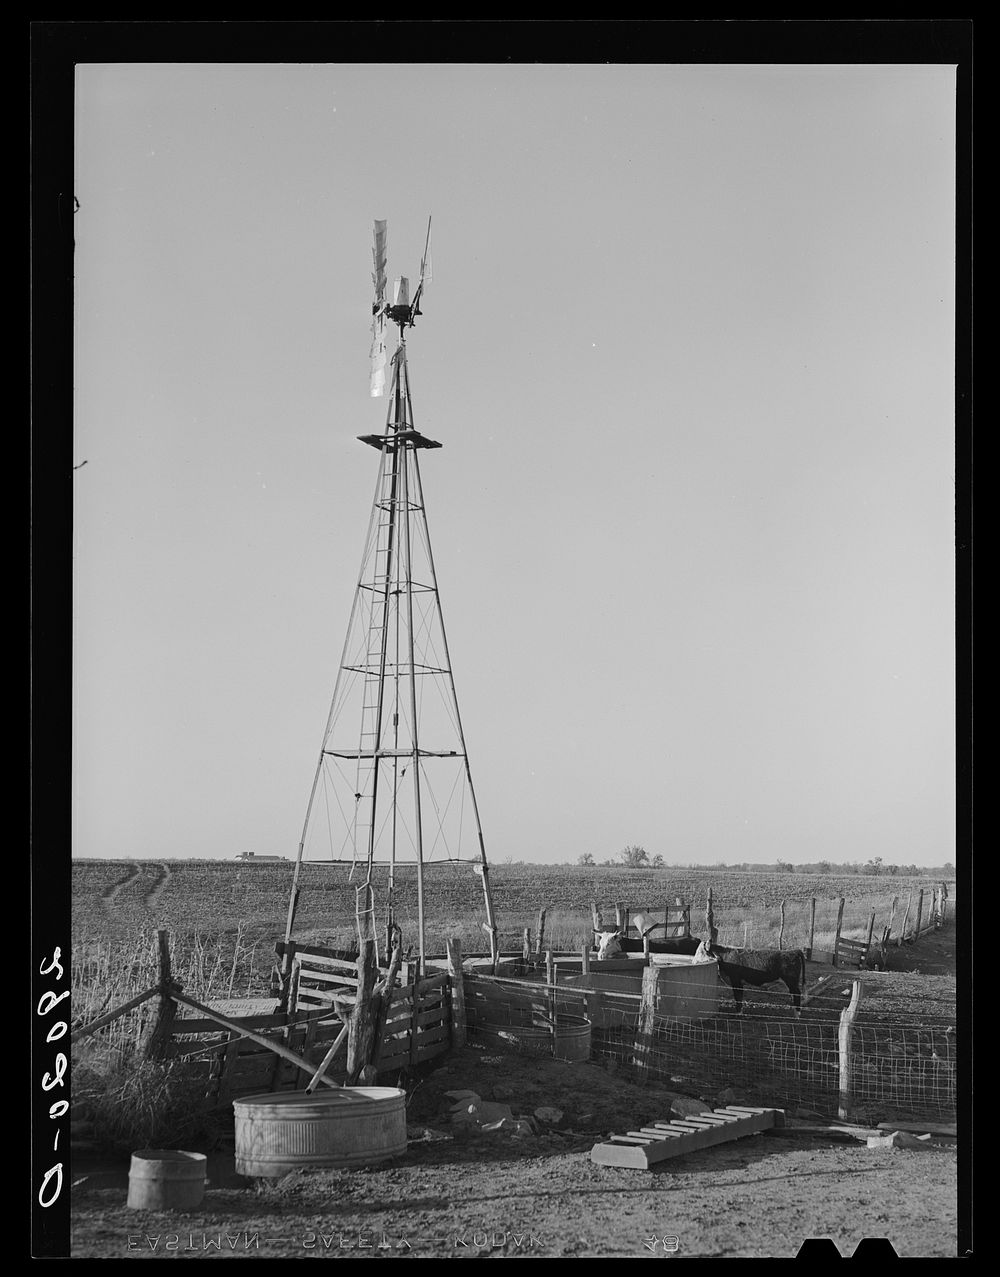 [Untitled photo, possibly related to: Watering tank for feeder cattle. Bois d'Arc Cooperative. Osage Farms, Missouri].…